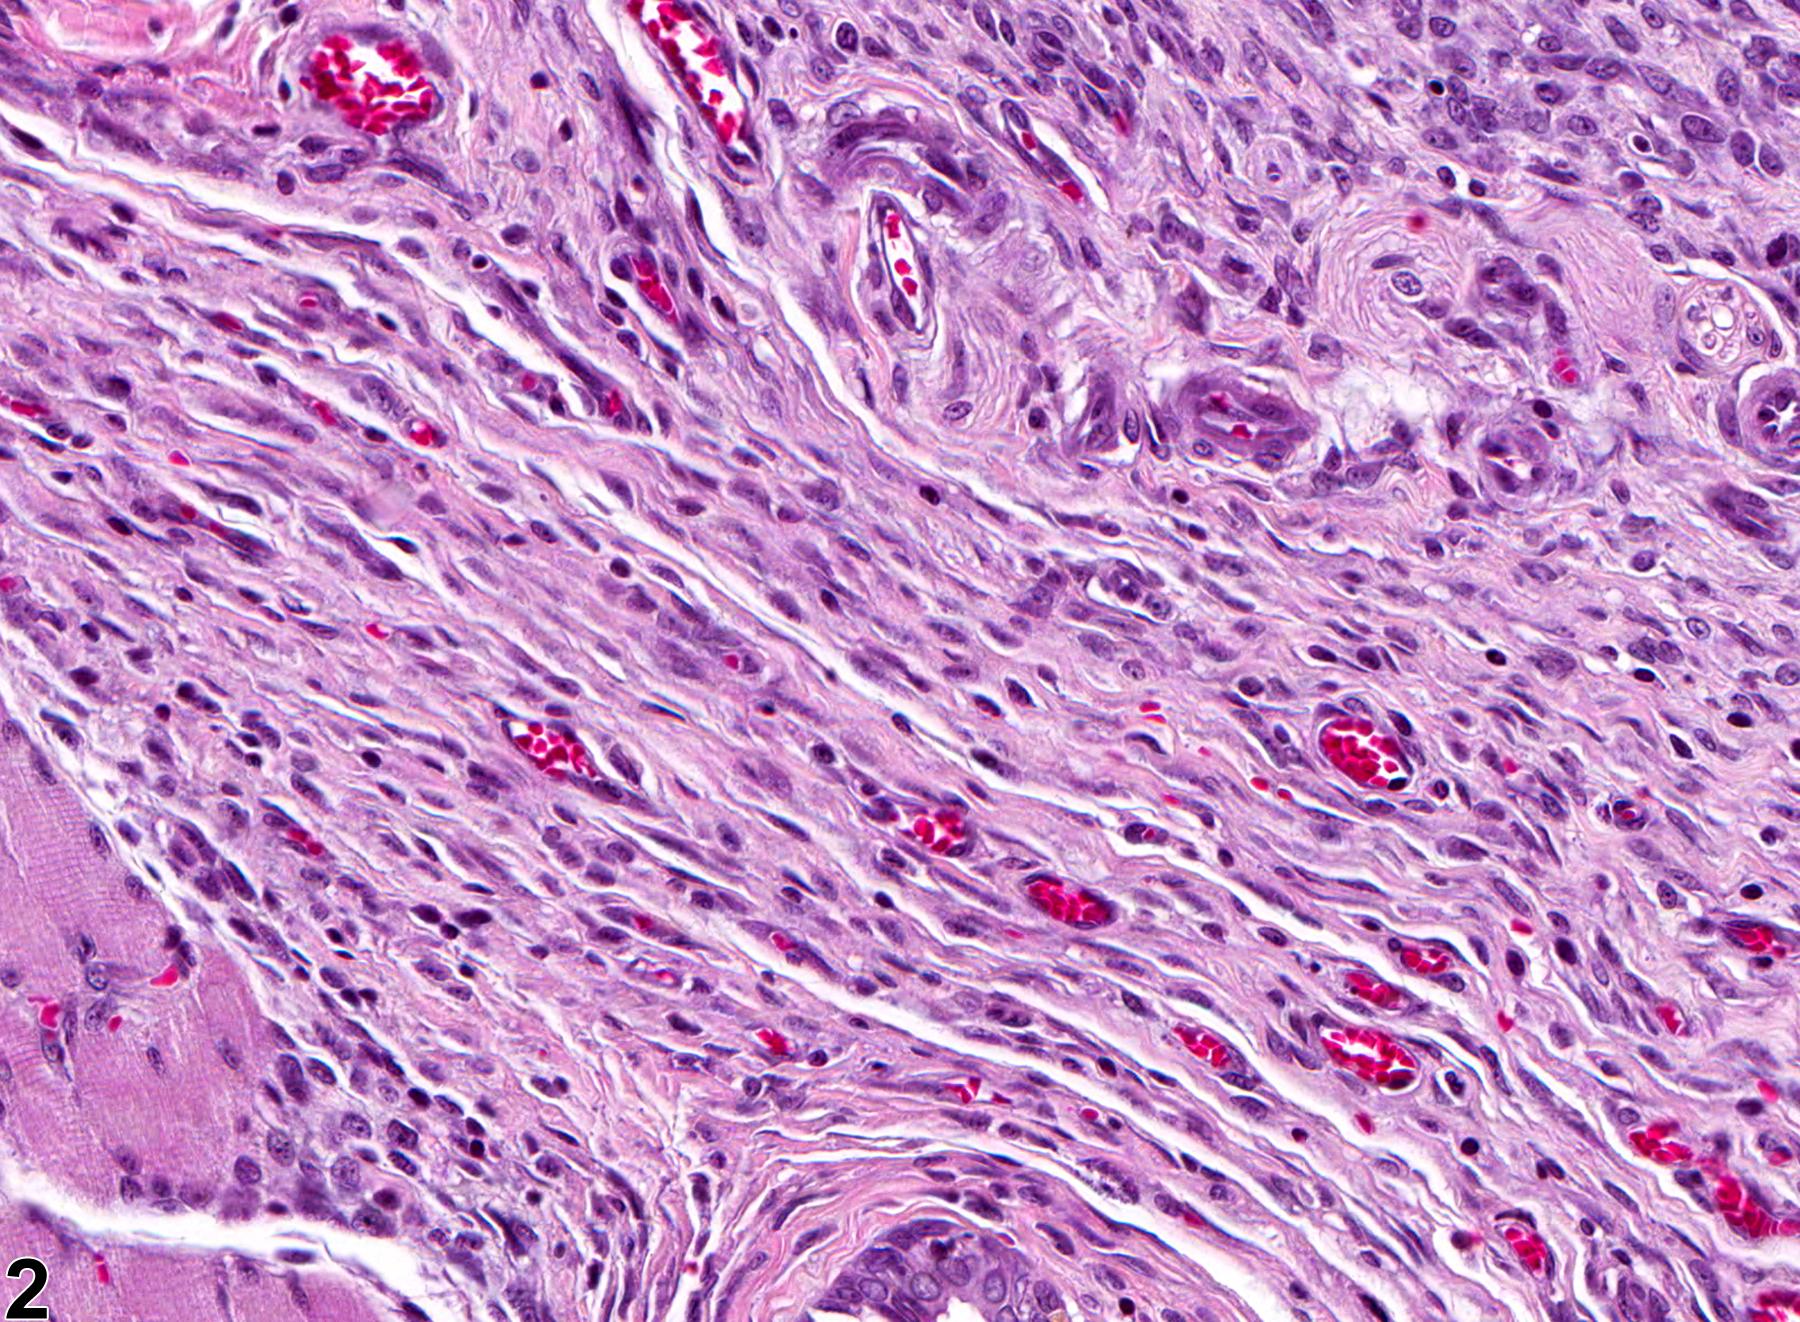 Image of fibrosis in the tongue from a male F344/N rat in a subchronic study